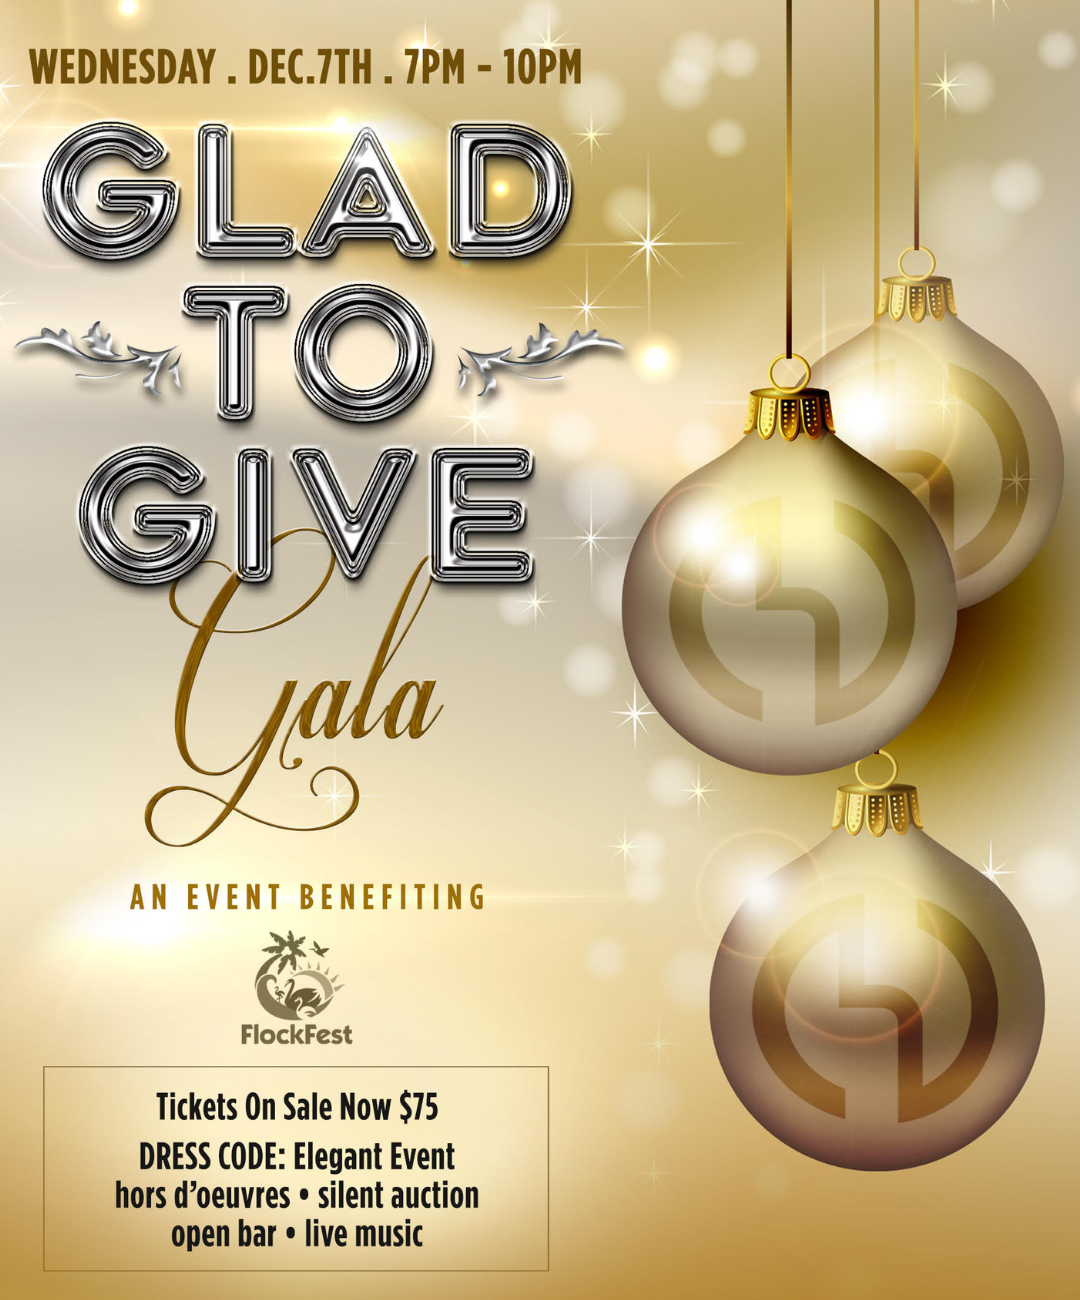 Glad to Give Gala - Wed Dec 7, 7pm-10pm